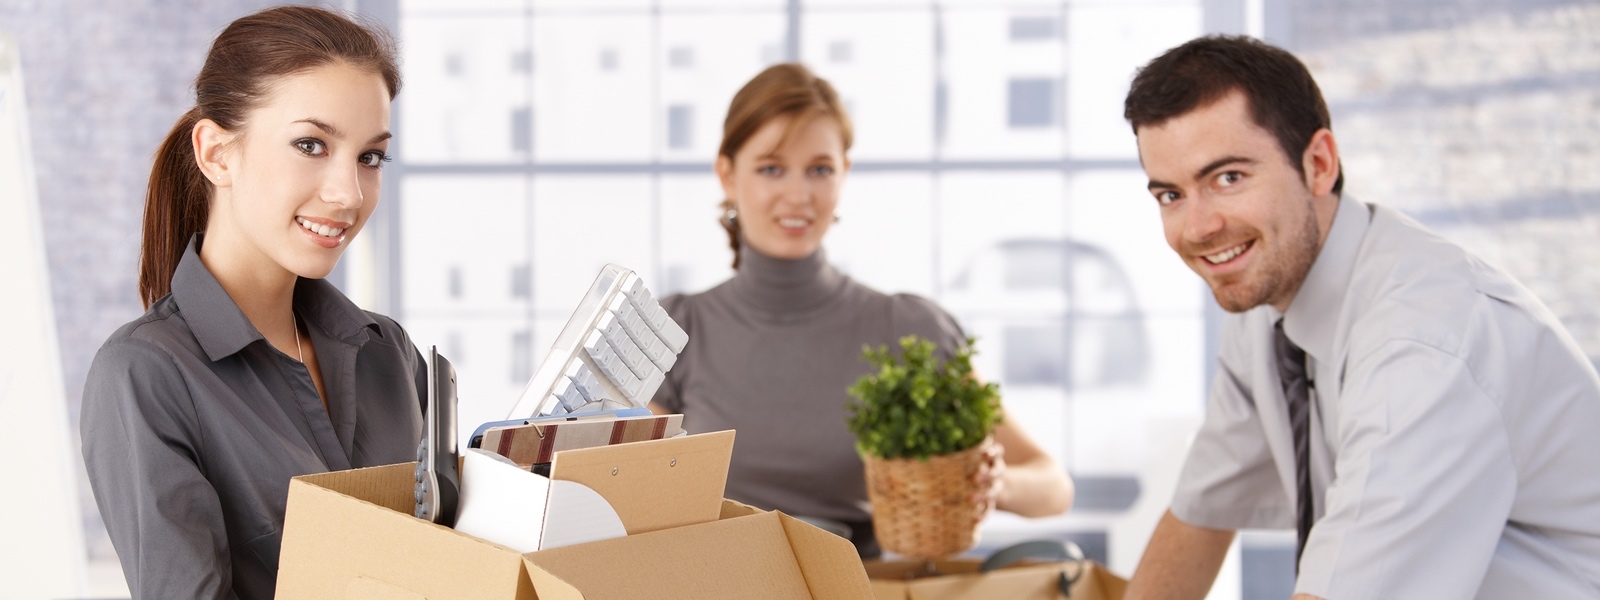 Young office workers moving office, unpacking boxes, smiling.?